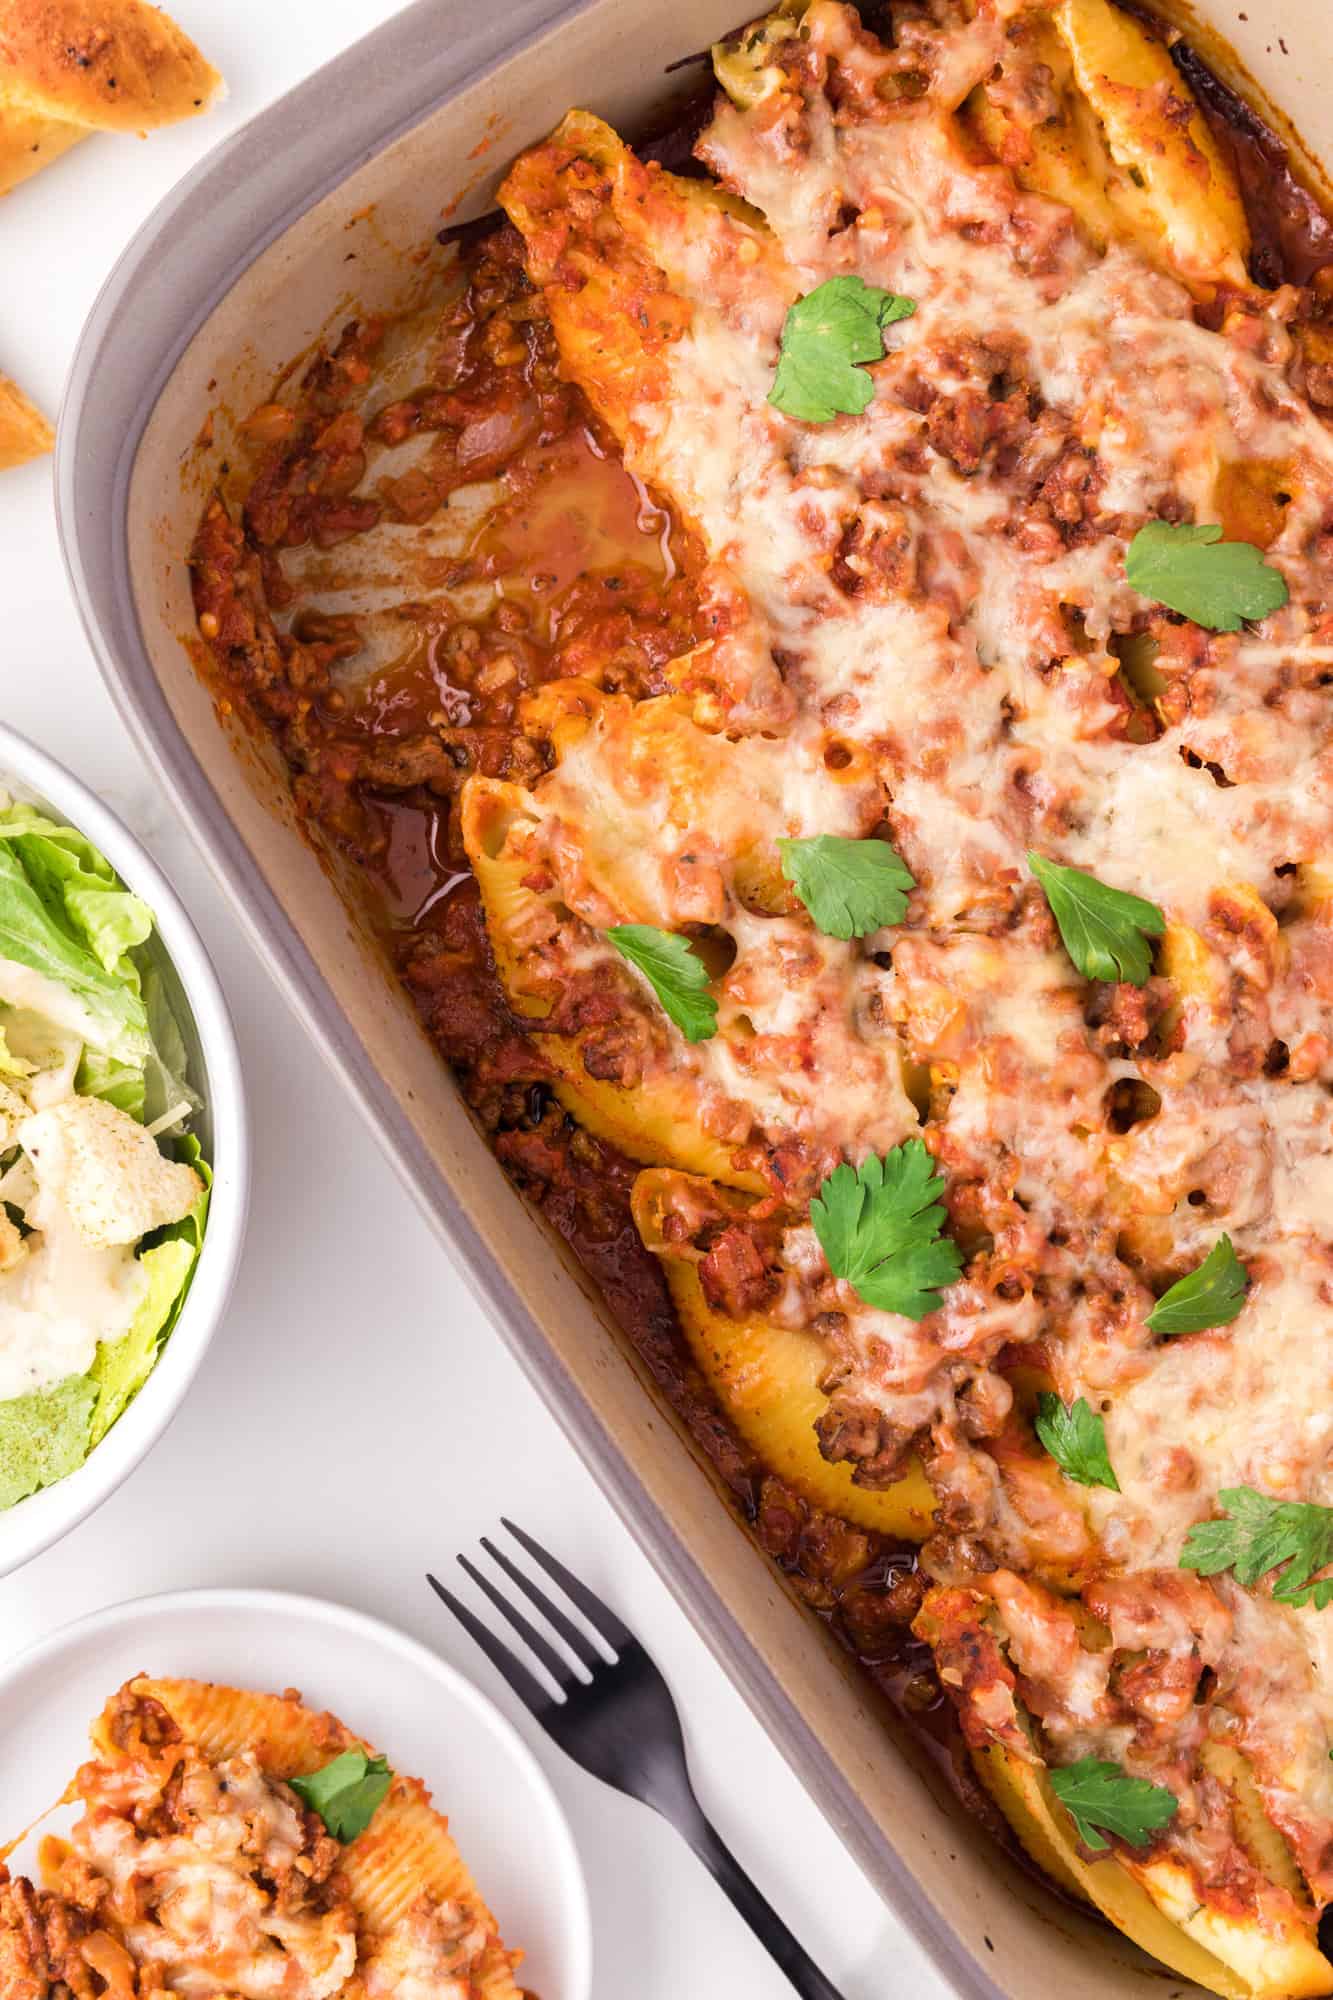 Stuffed shells in a casserole dish, one removed.